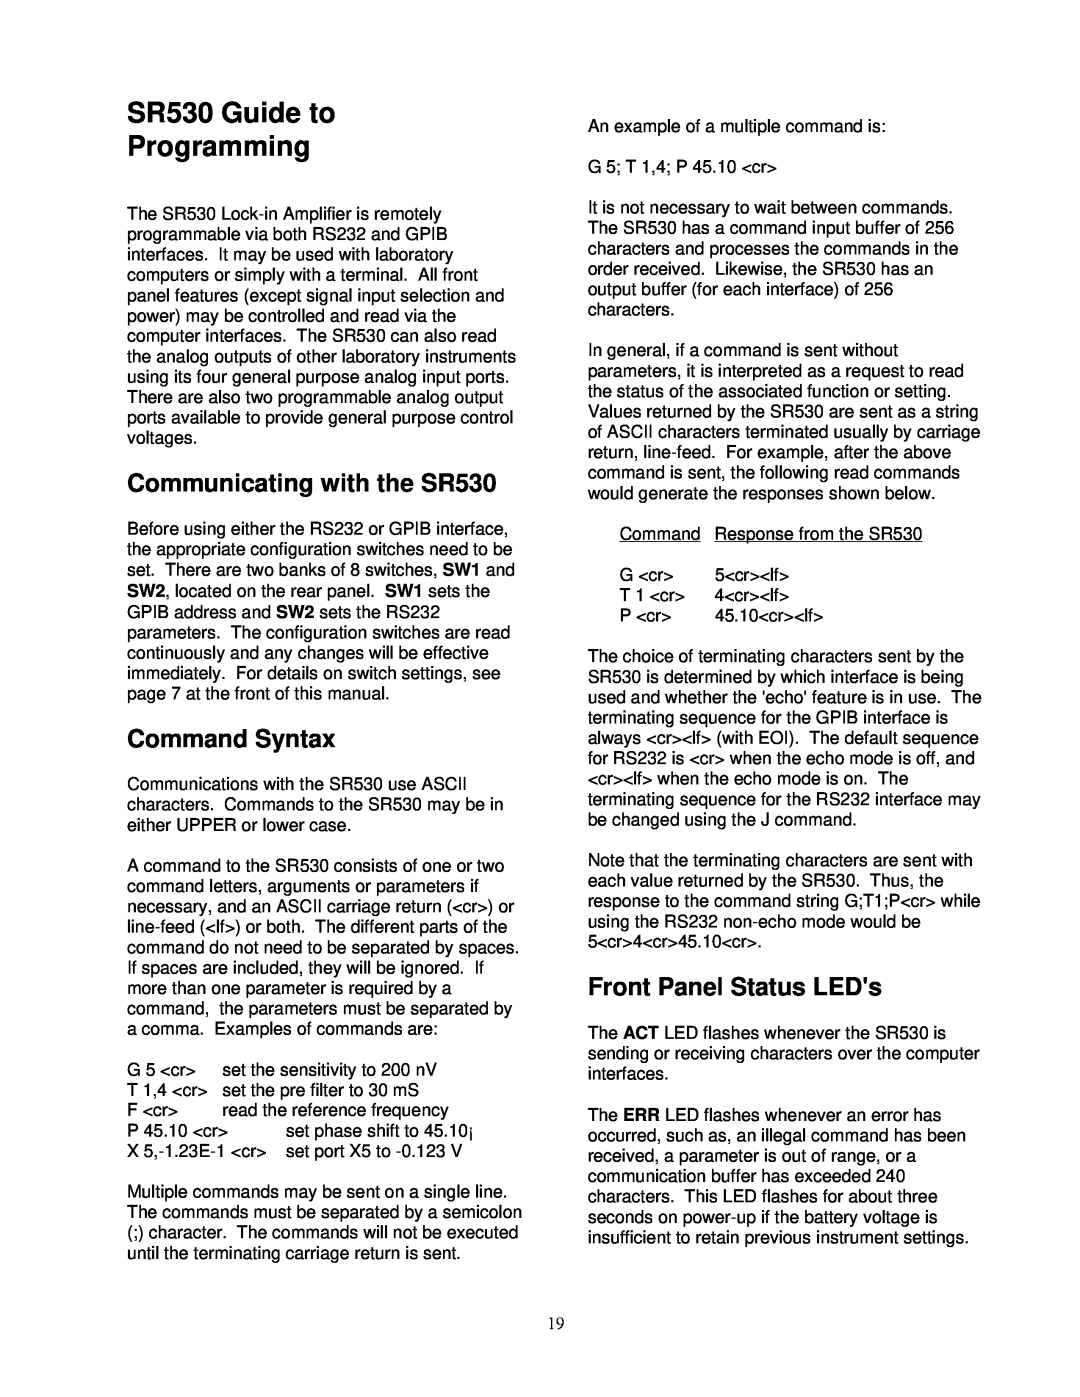 SRS Labs manual SR530 Guide to Programming, Communicating with the SR530, Command Syntax, Front Panel Status LEDs 